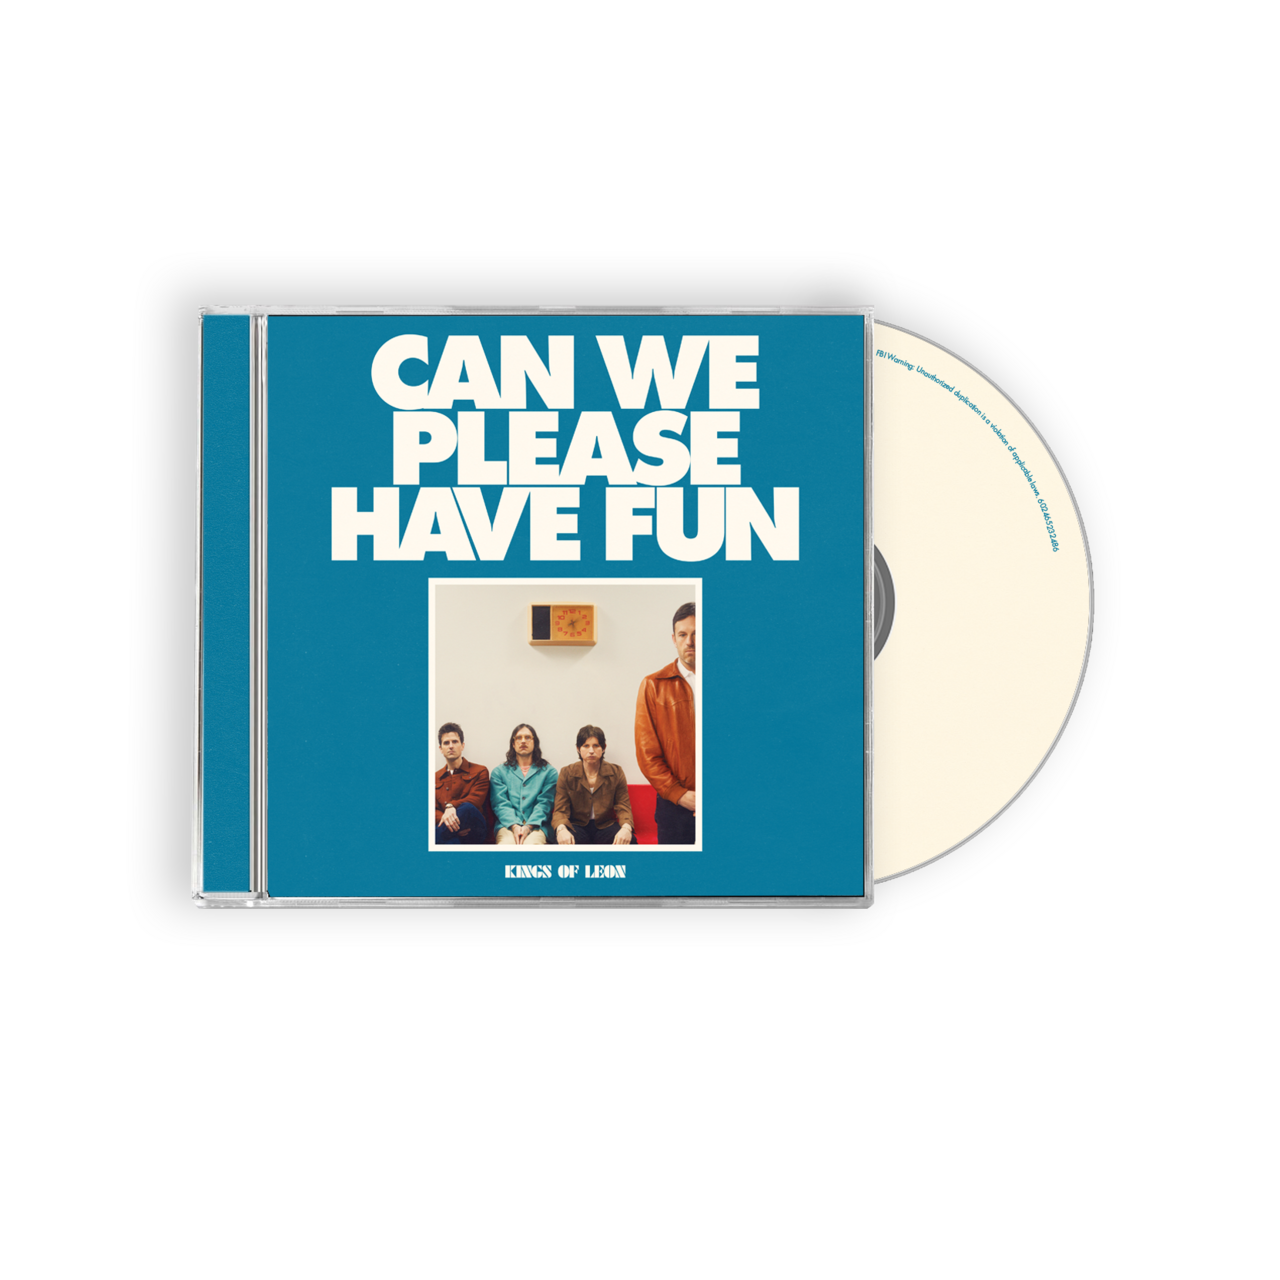 Can We Please Have Fun: Limited Red Vinyl LP, CD + Signed Art Card